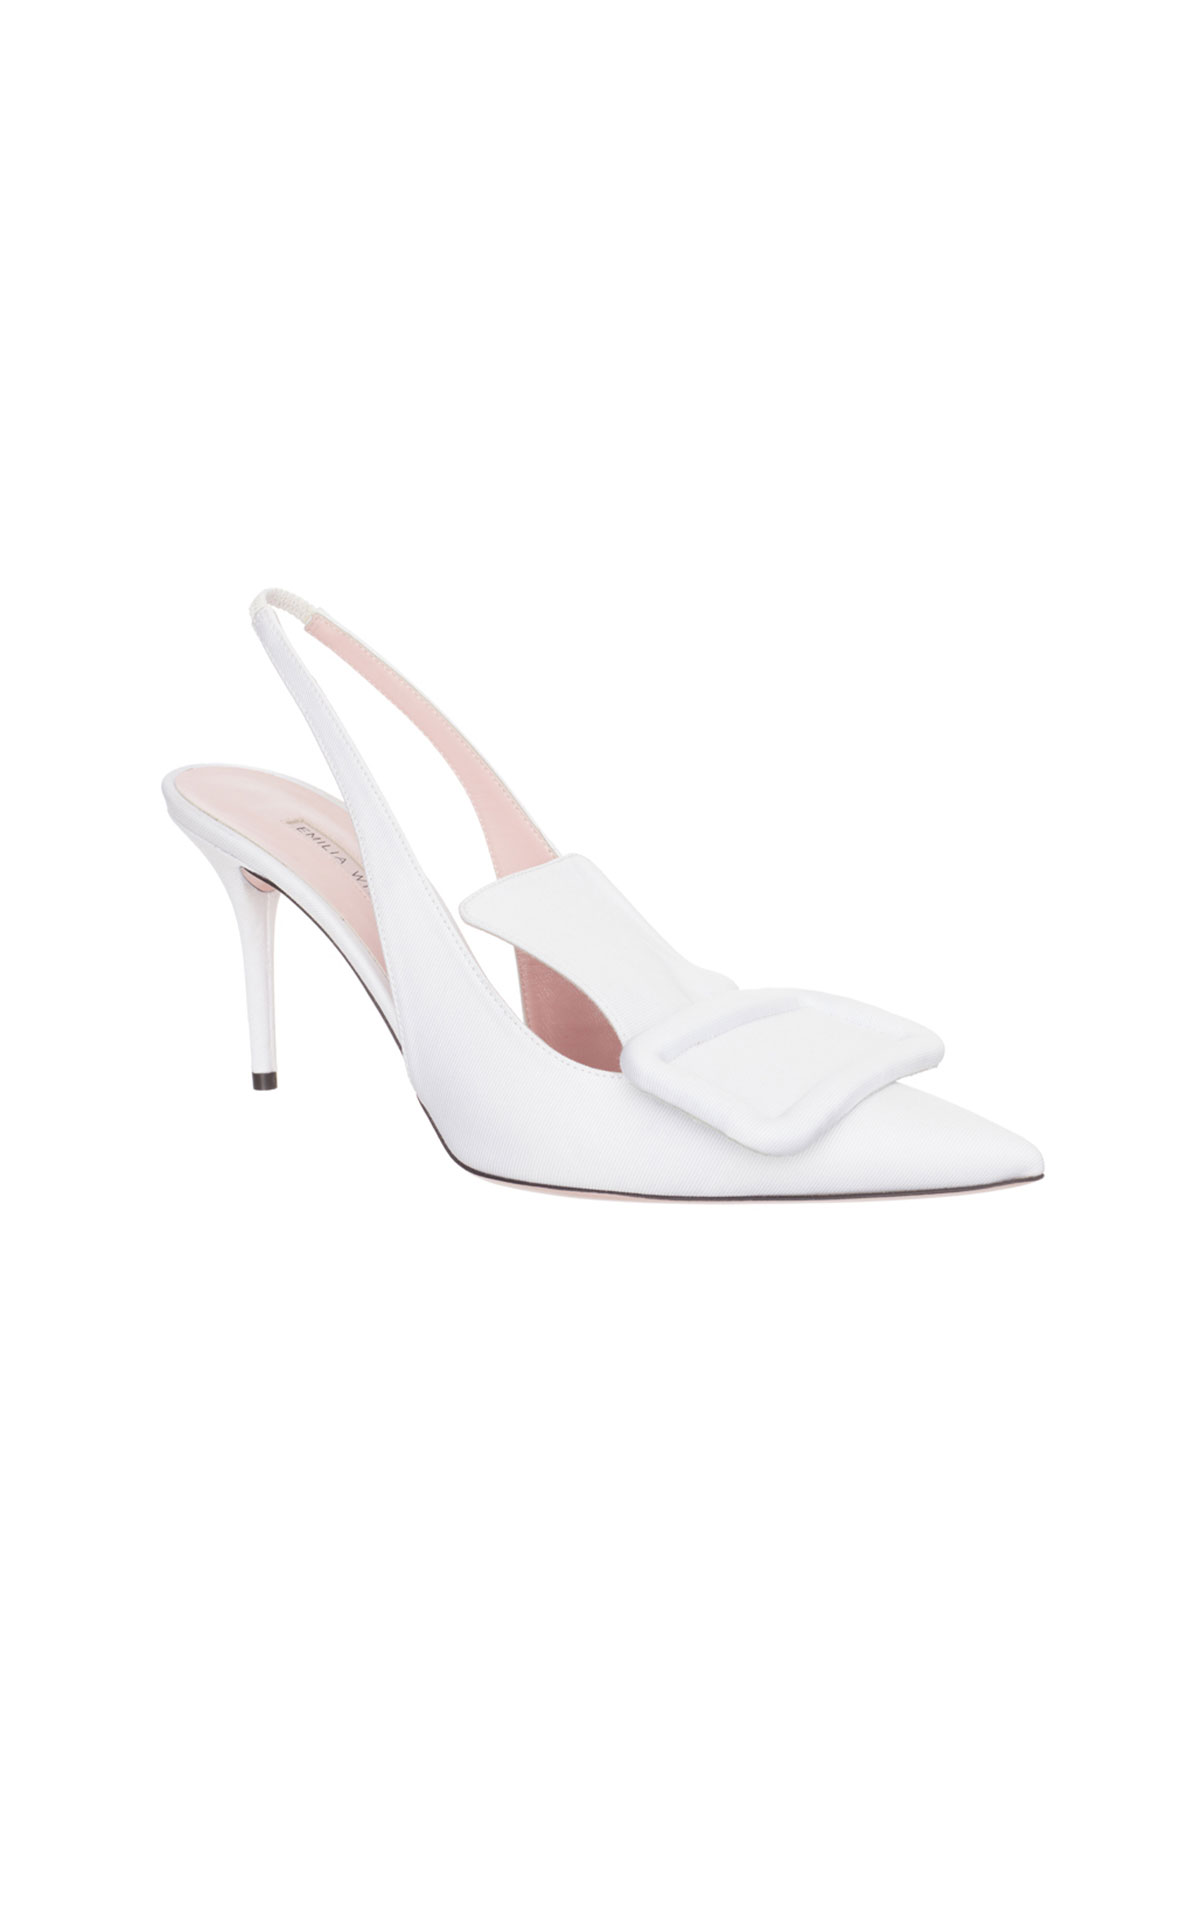 DO GOOD Emilia Wickstead White shoes from Bicester Village